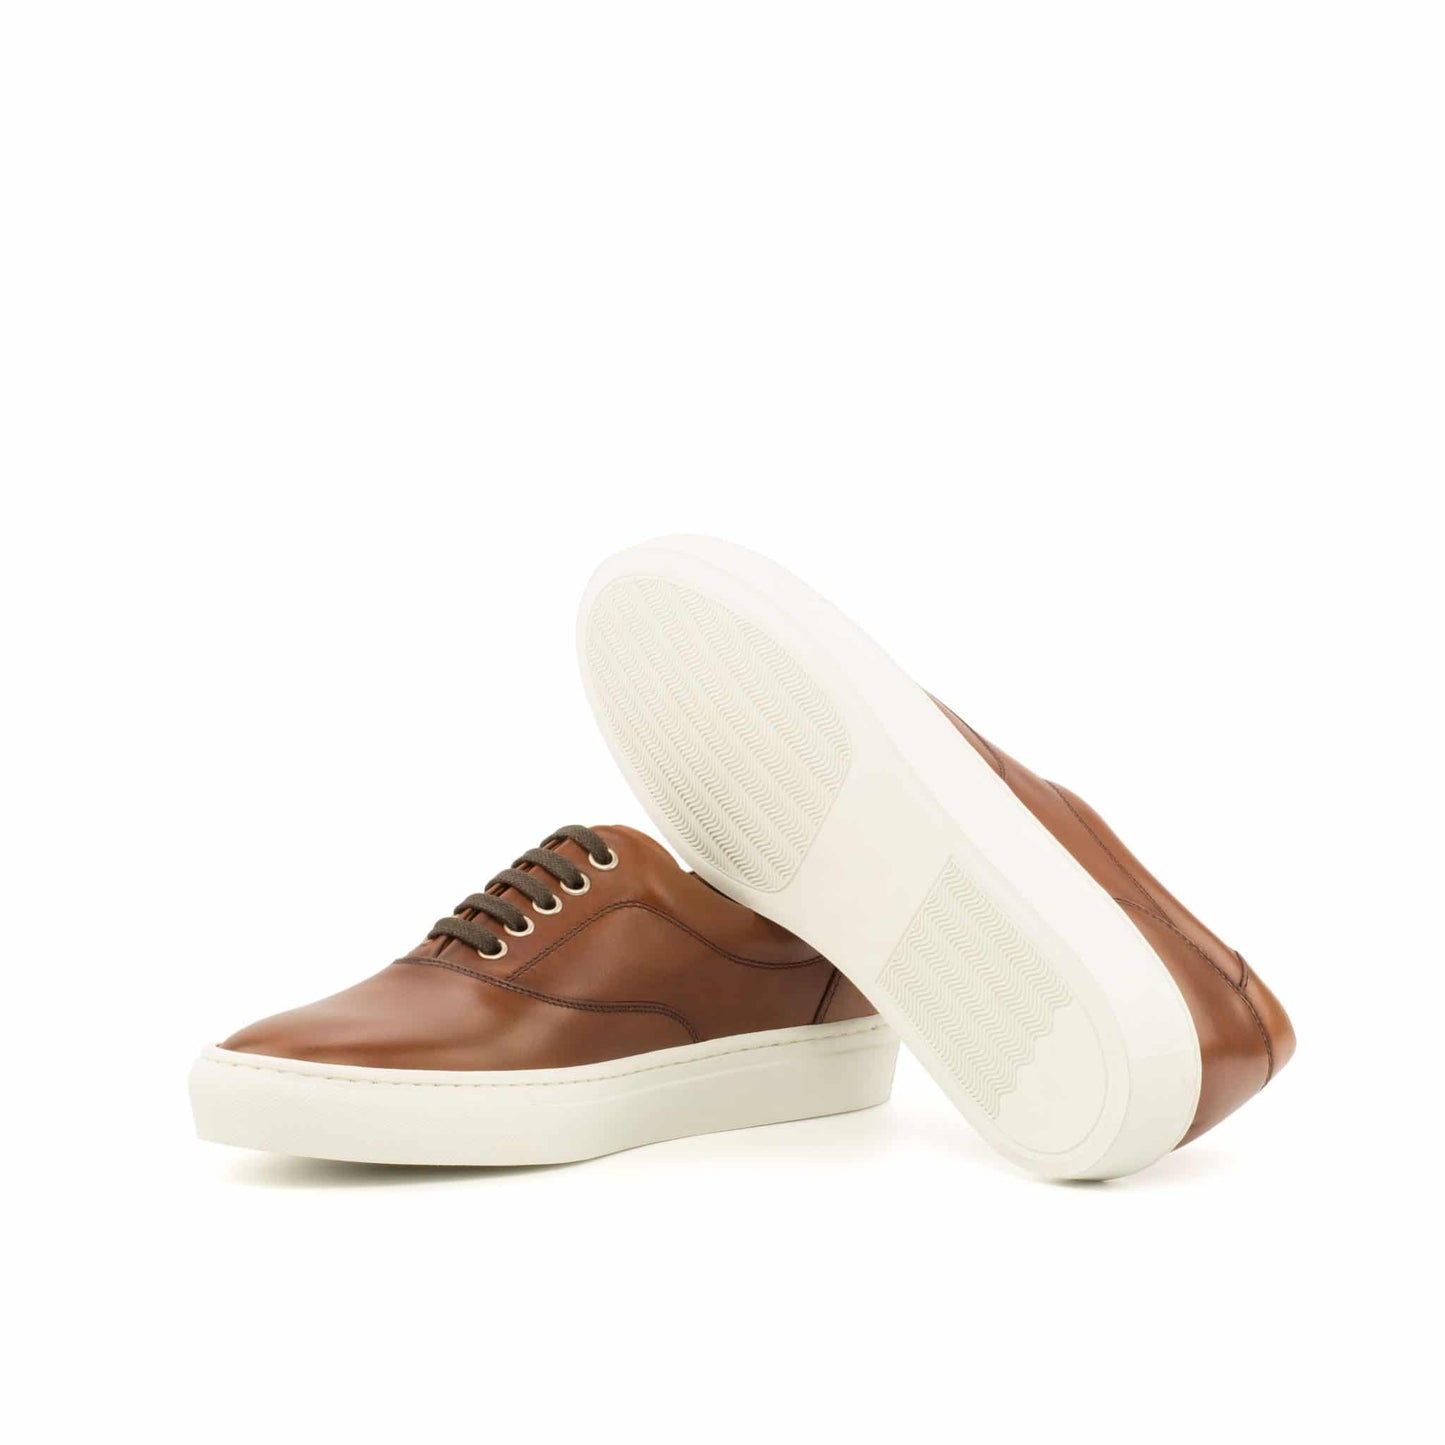 Tan Leather Low Top Lace Up Sneaker for Men. White Comfortable Cup Sole.